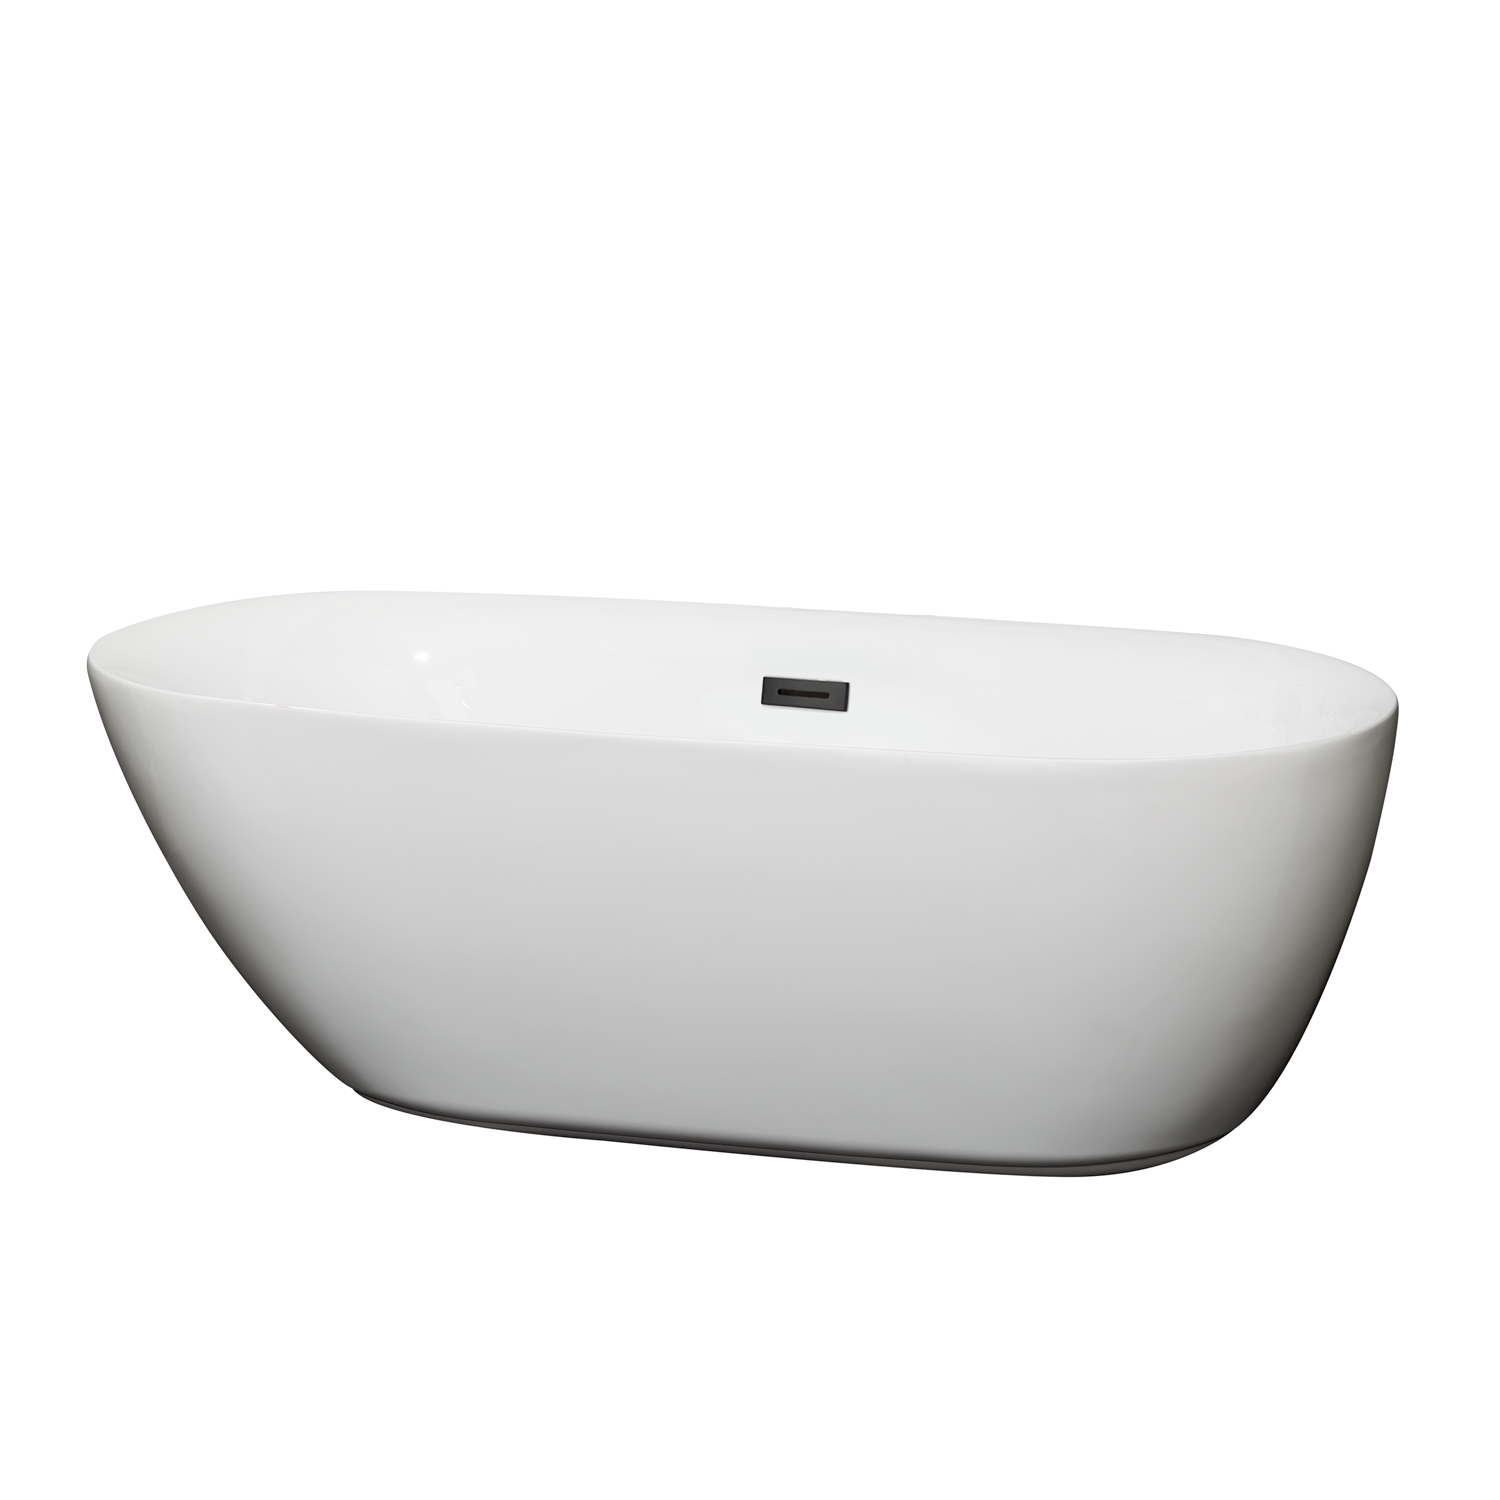 65" Freestanding Bathtub in White with Matte Black Drain and Overflow Trim